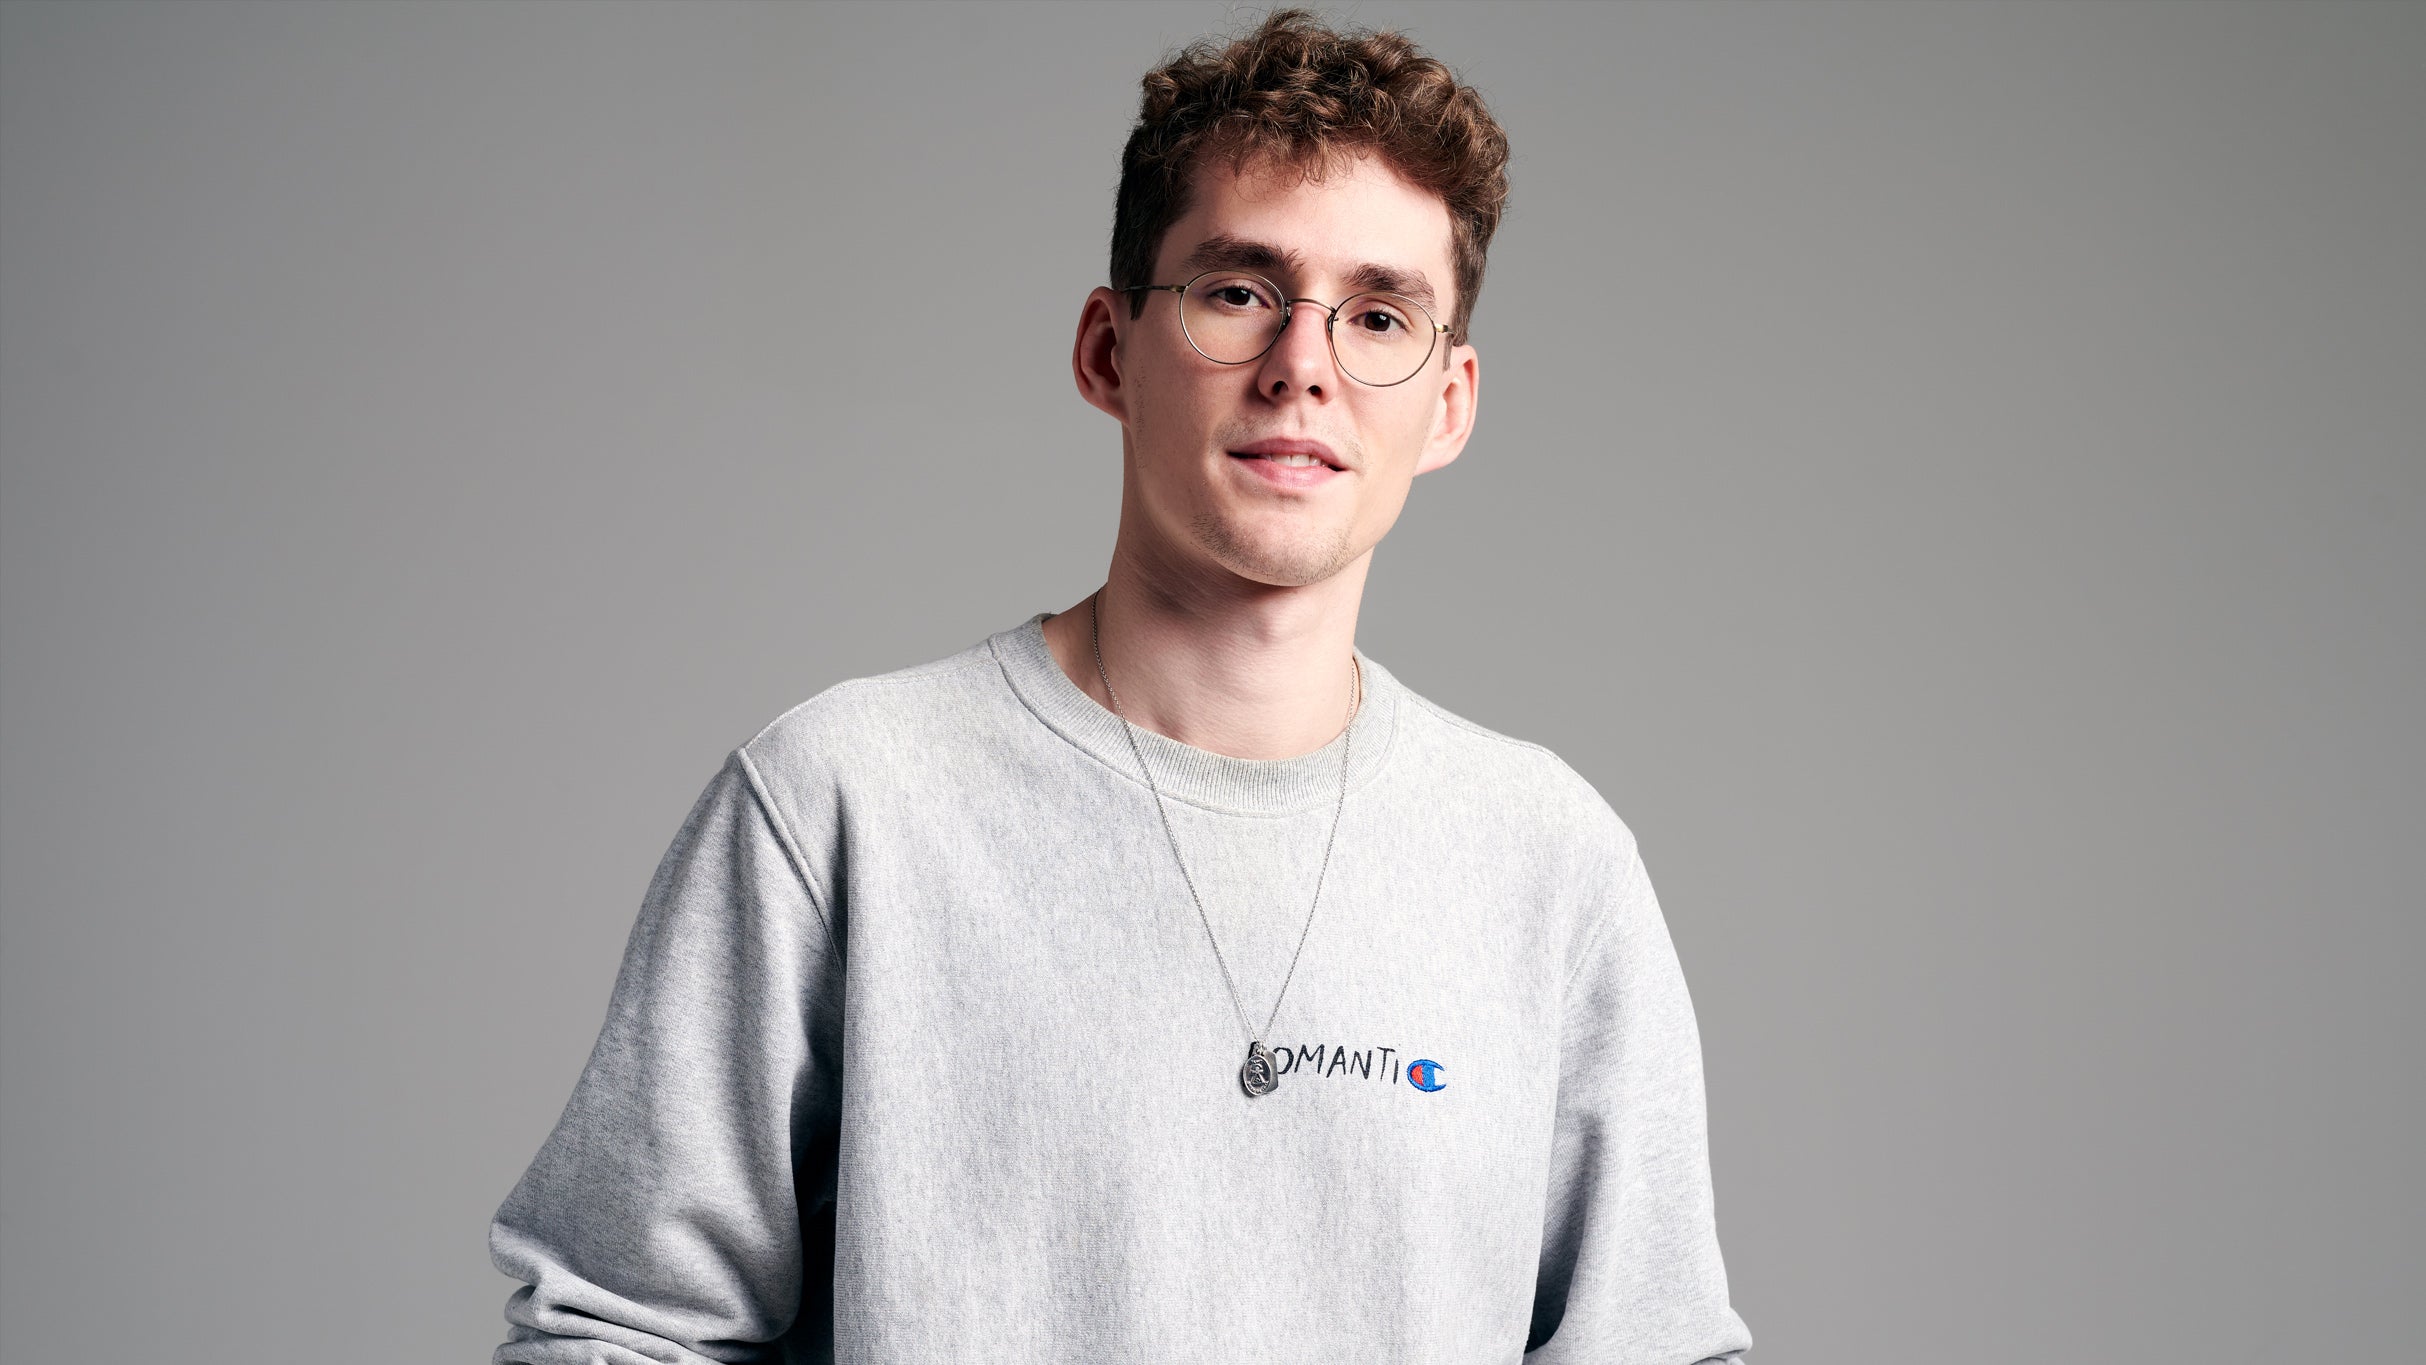 Insomniac Presents Lost Frequencies - All Stand Together Tour in Hollywood promo photo for Ticketmaster presale offer code